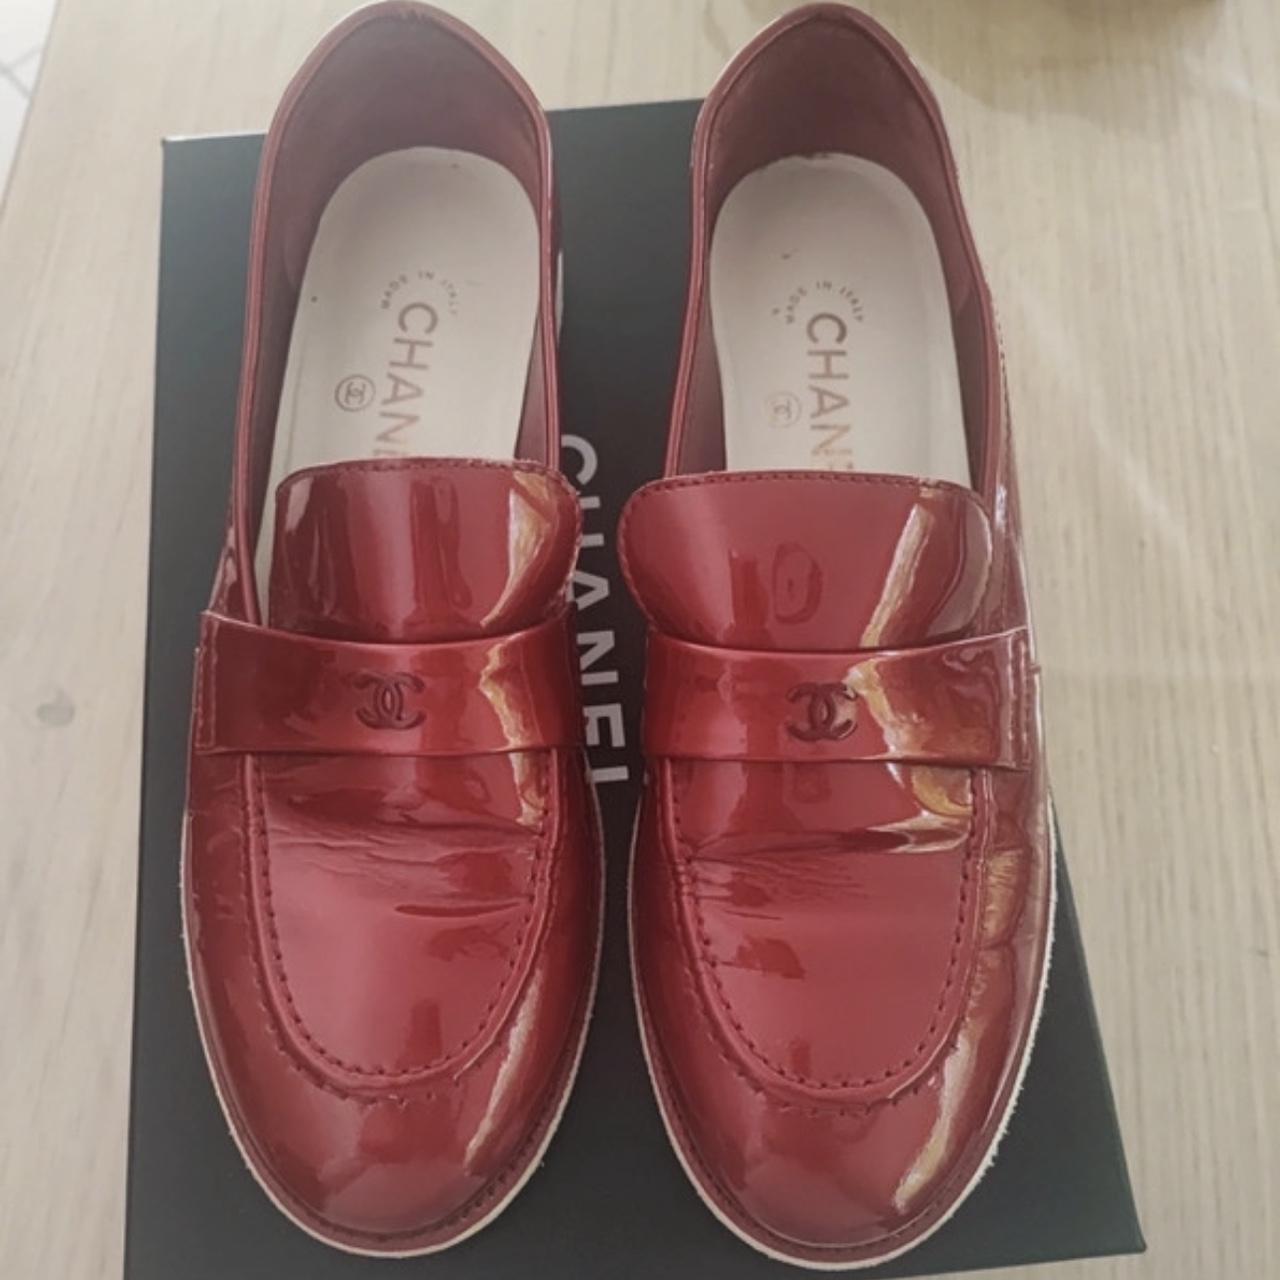 Chanel red leather moccasins / loafers size 38.5 - Depop